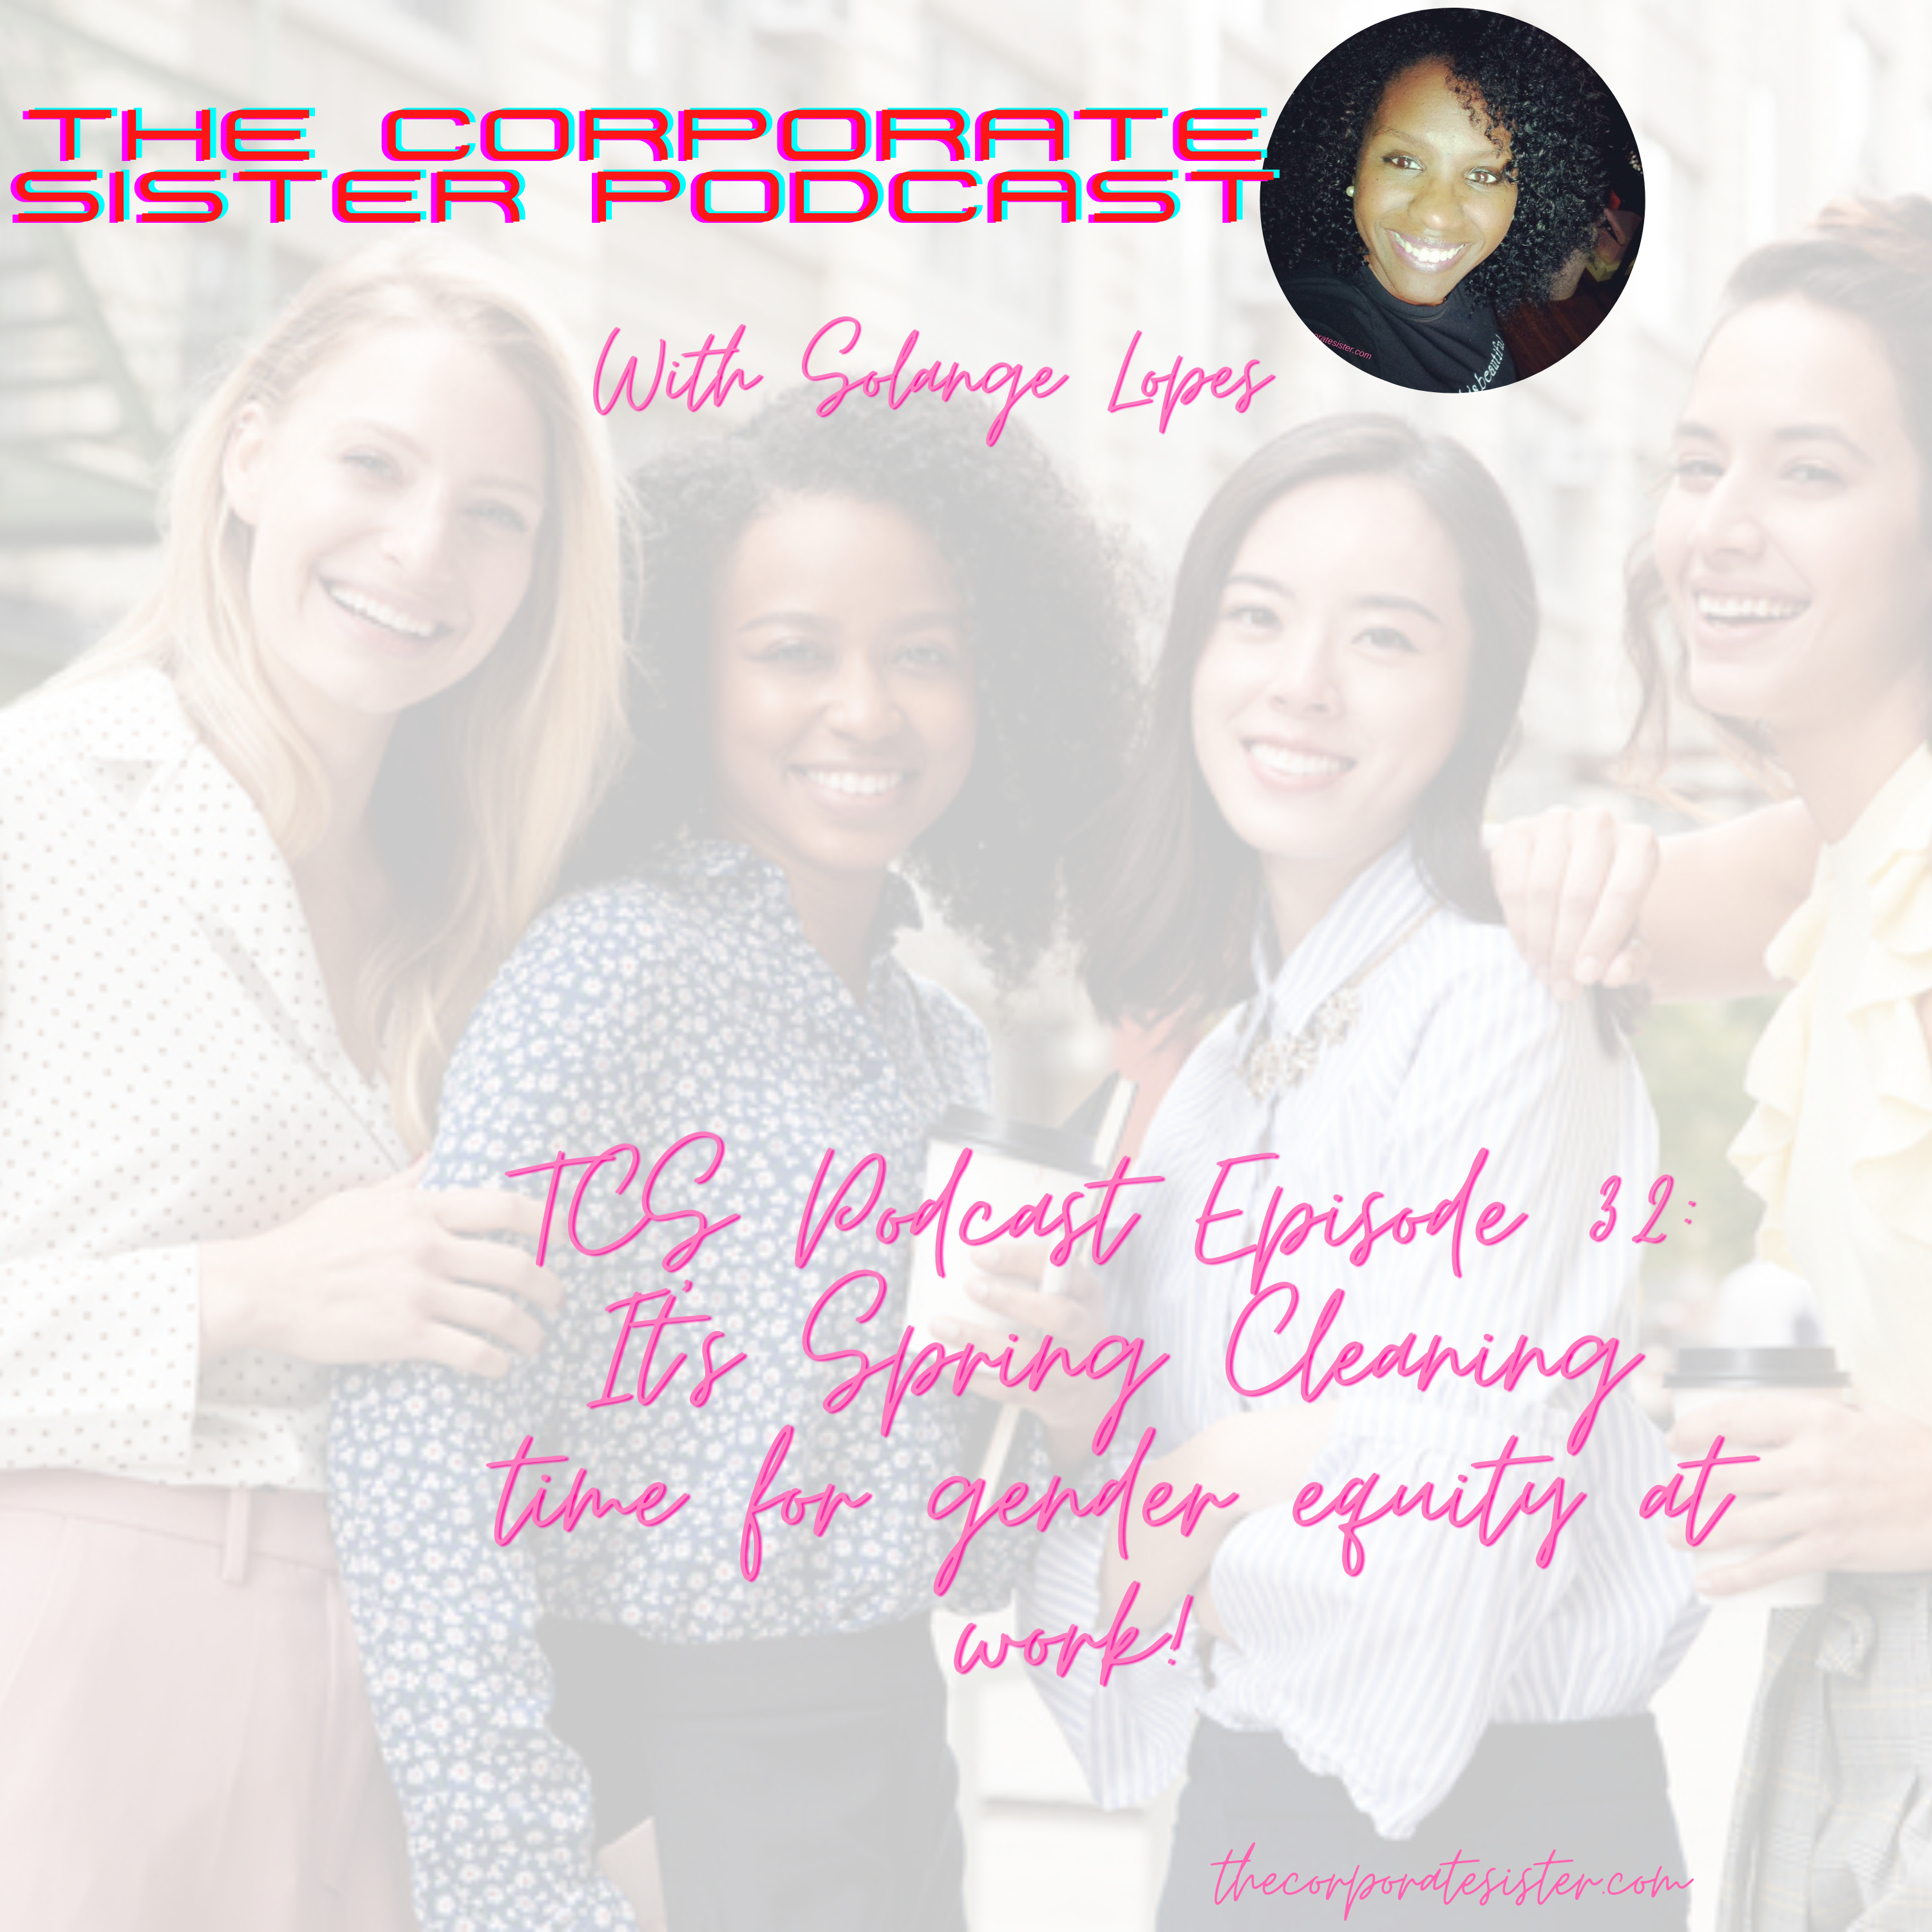 TCS Podcast Episode 32: Spring cleaning time for gender equity at work!